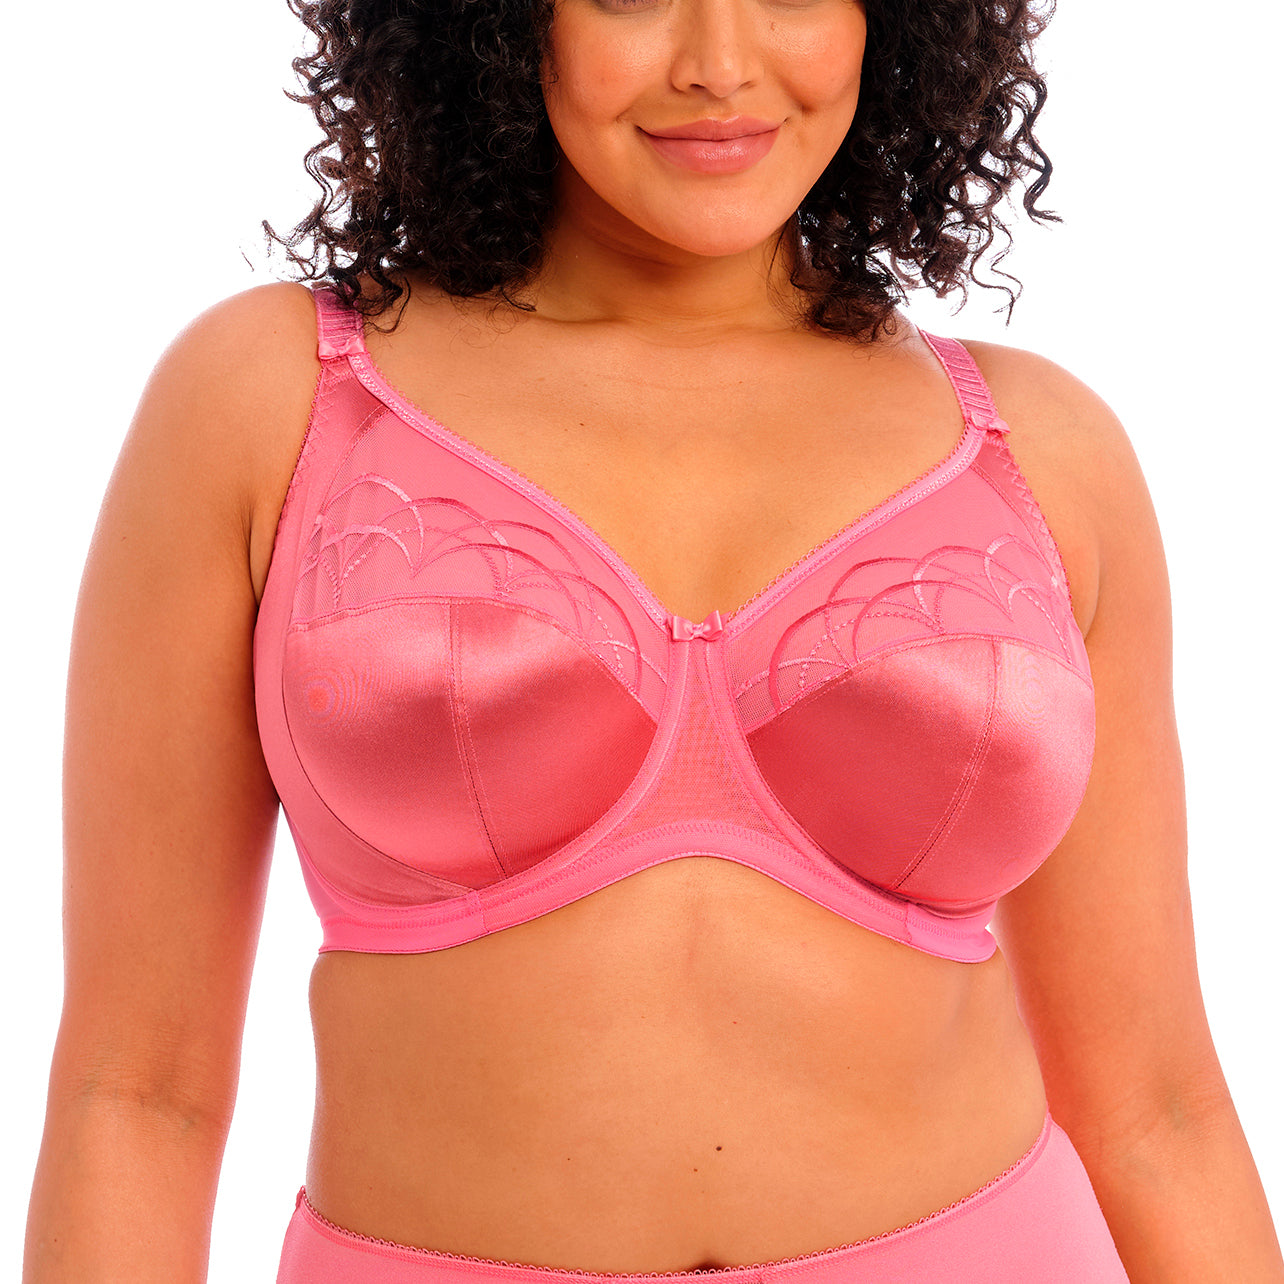 Elomi Women's Plus Size Cate Underwire Full Cup Banded Bra, Alaska